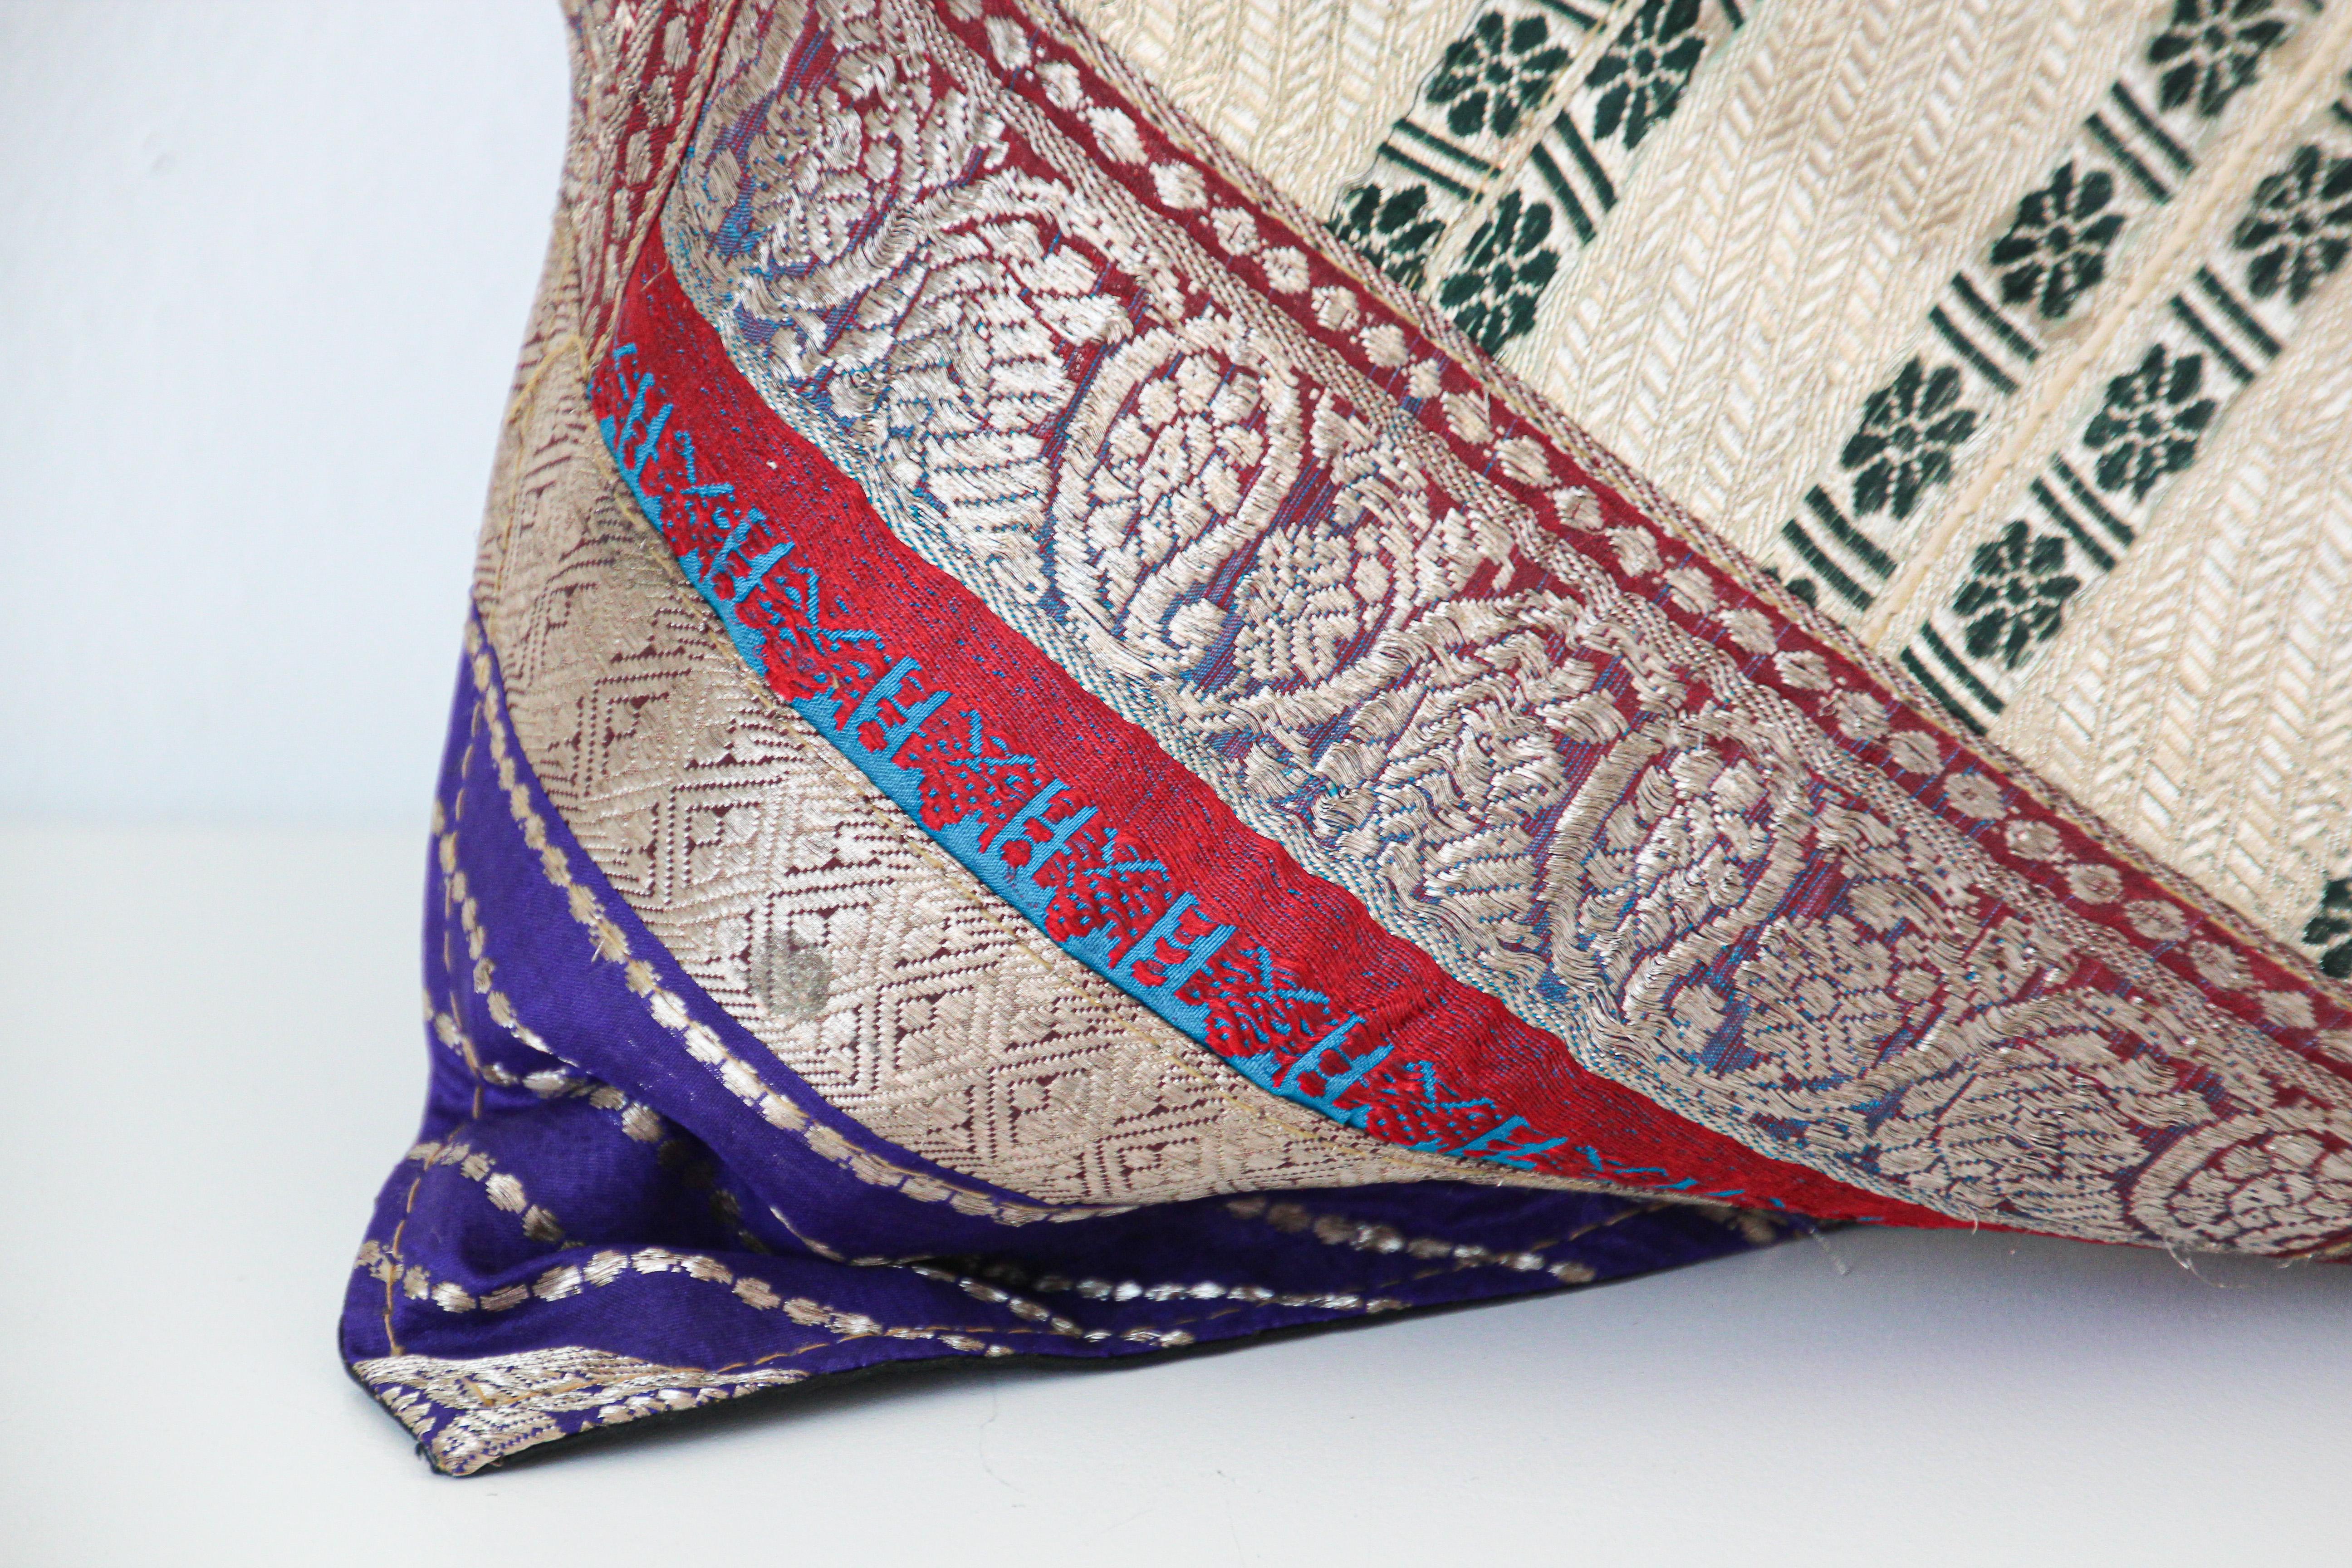 Moorish Decorative Trow Pillow Made from Vintage Sari Borders, India For Sale